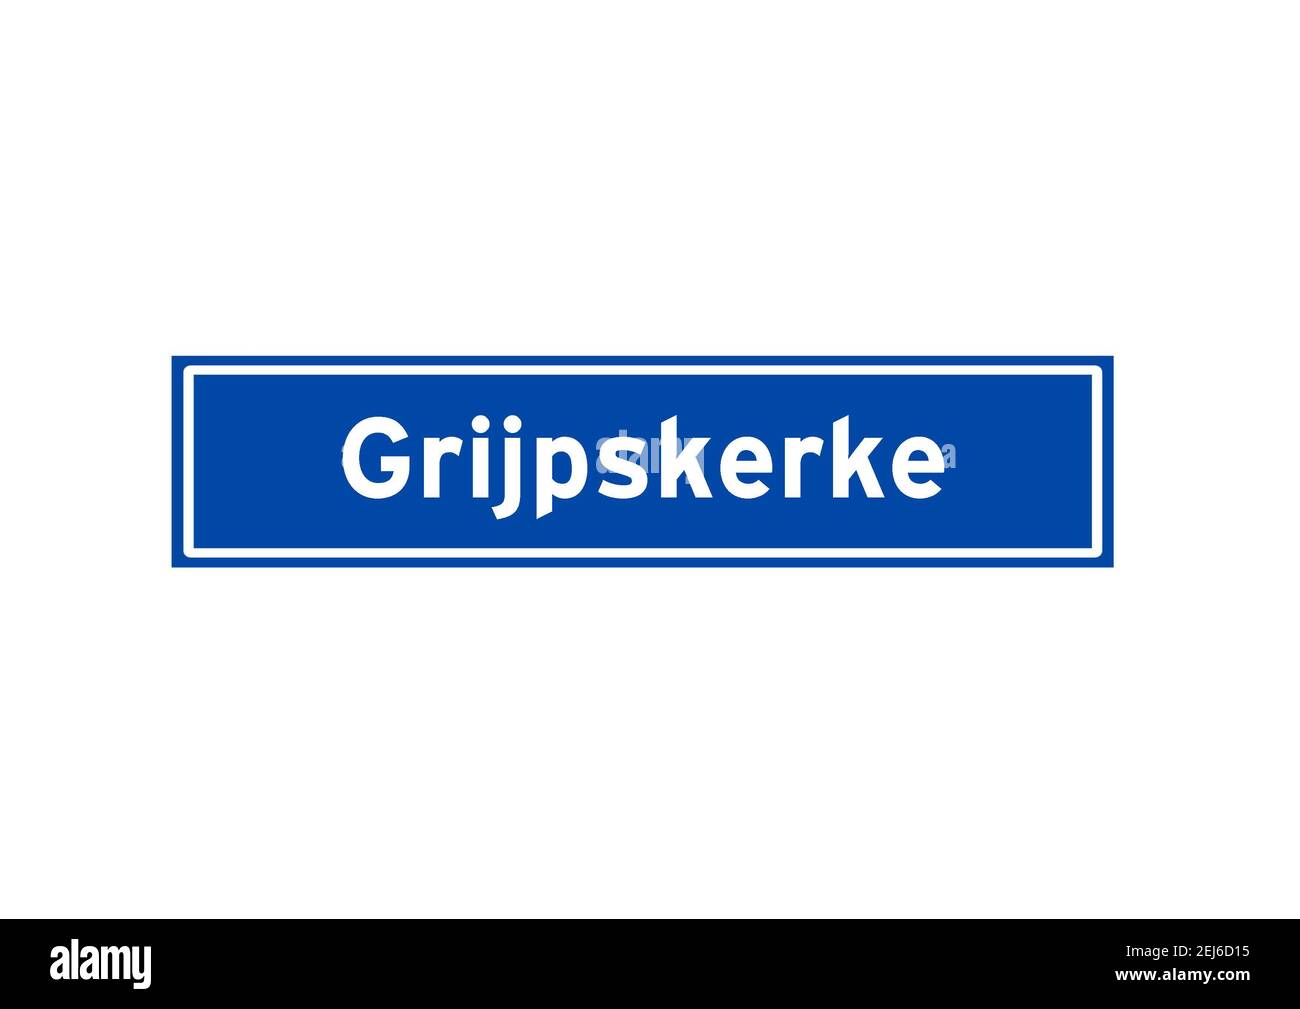 Grijpskerke isolated Dutch place name sign. City sign from the Netherlands. Stock Photo